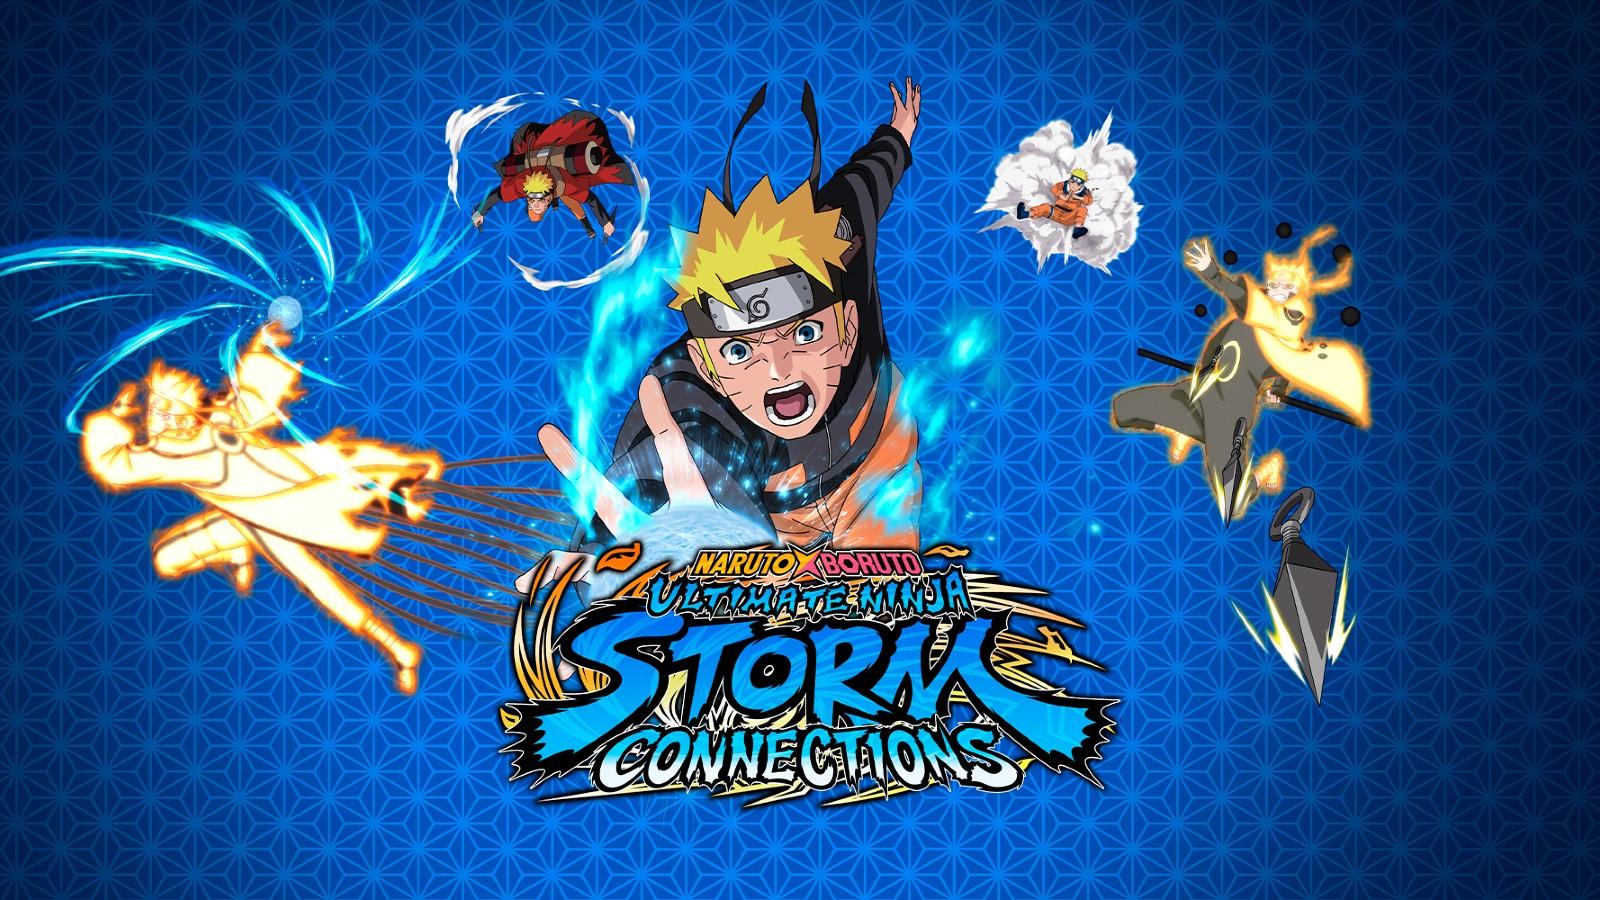 Naruto X Boruto Ultimate Ninja Storm Connections Launches This November,  Preorder Detailed — Too Much Gaming